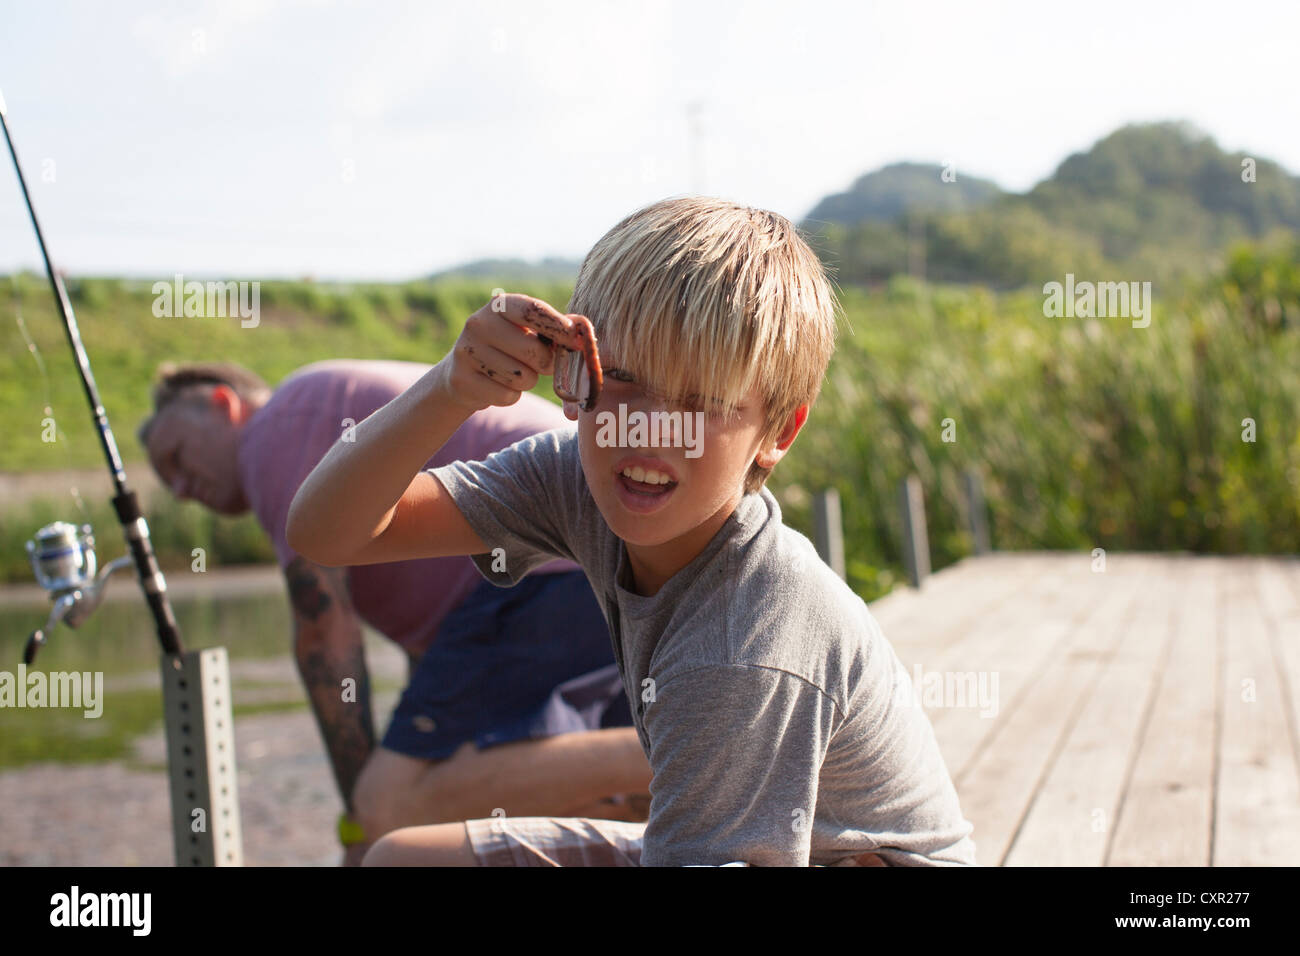 Father and son fishing, boy holding worm Stock Photo